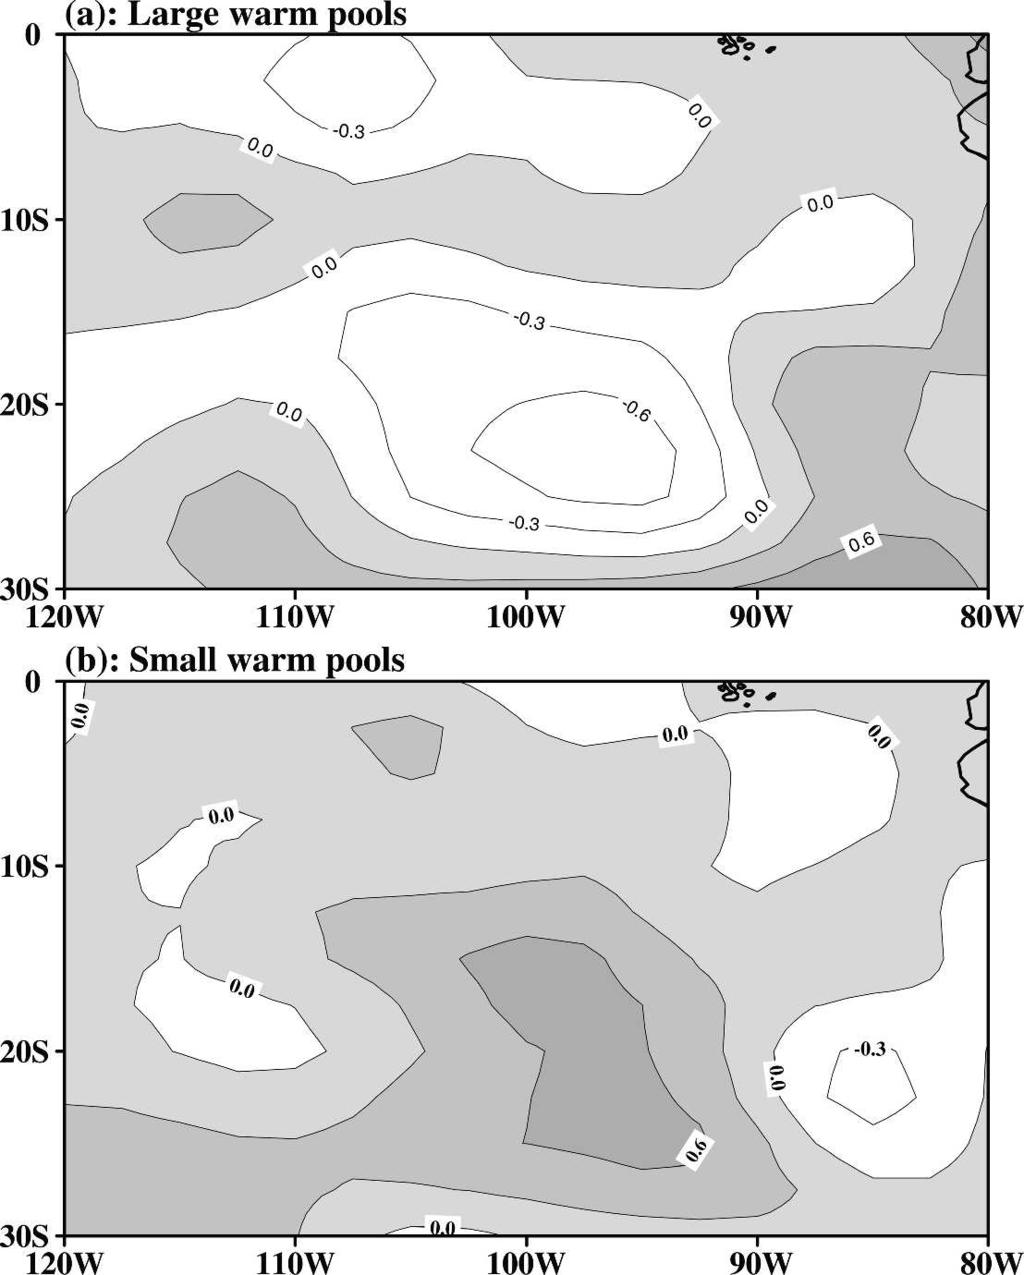 3022 J O U R N A L O F C L I M A T E VOLUME 19 FIG. 10. Composites of the 500-mb vertical velocity anomalies (10 4 hpa s 1 ) during ASO for (a) large and (b) small Atlantic warm pools.